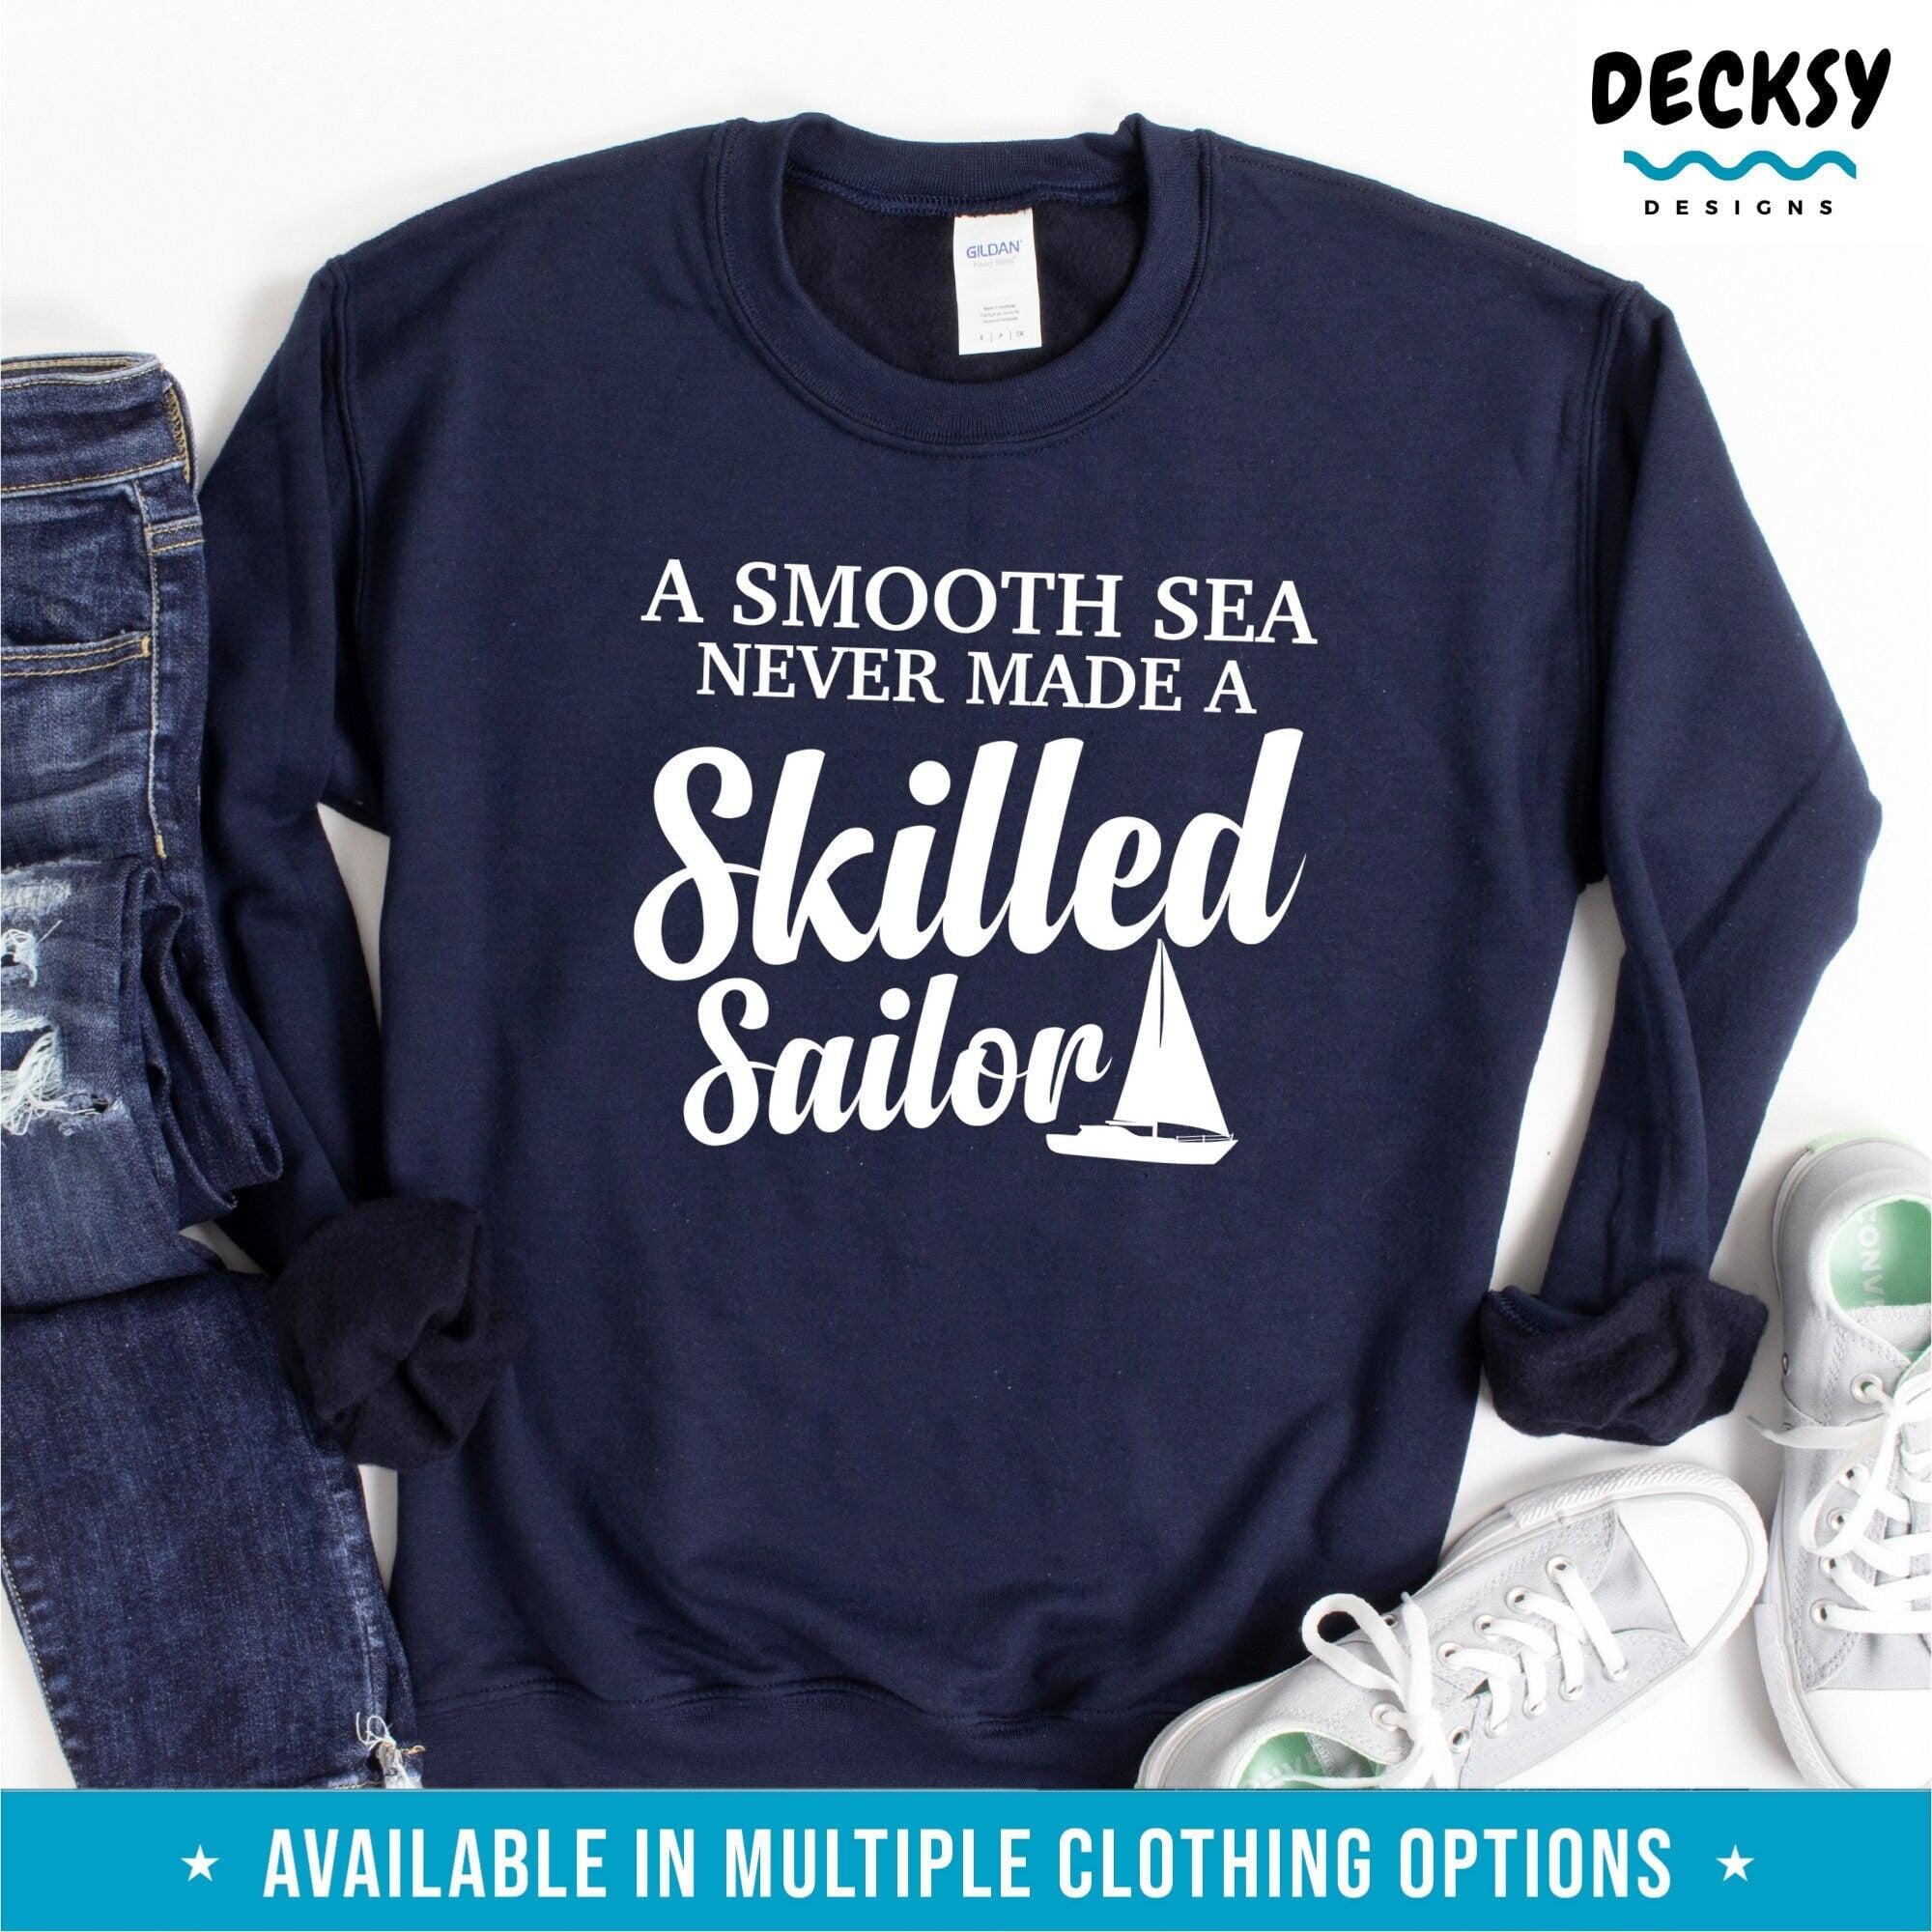 Sailing Shirt, Gift for Boat Owner-Clothing:Gender-Neutral Adult Clothing:Tops & Tees:T-shirts:Graphic Tees-DecksyDesigns